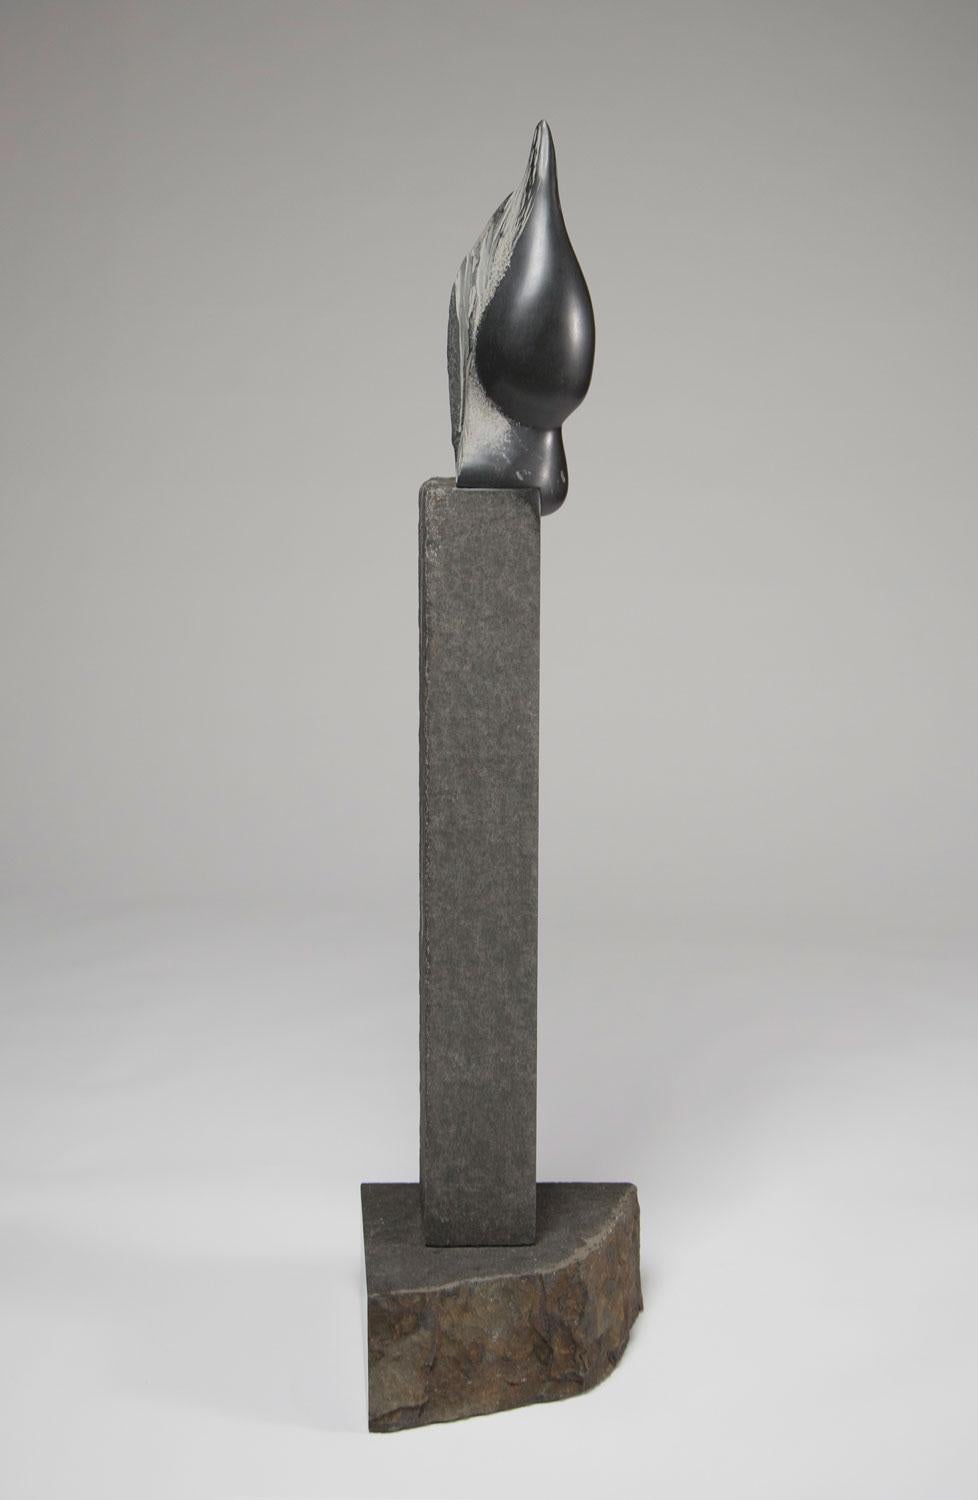 In Rebecca Johnson's stone sculpture “Aquifer,” two lusciously polished basalt raindrops stand perched at the edge of the tall base as if ready to fall off, leaving behind only dryness.

Inspired by the parched Northern California climate, the